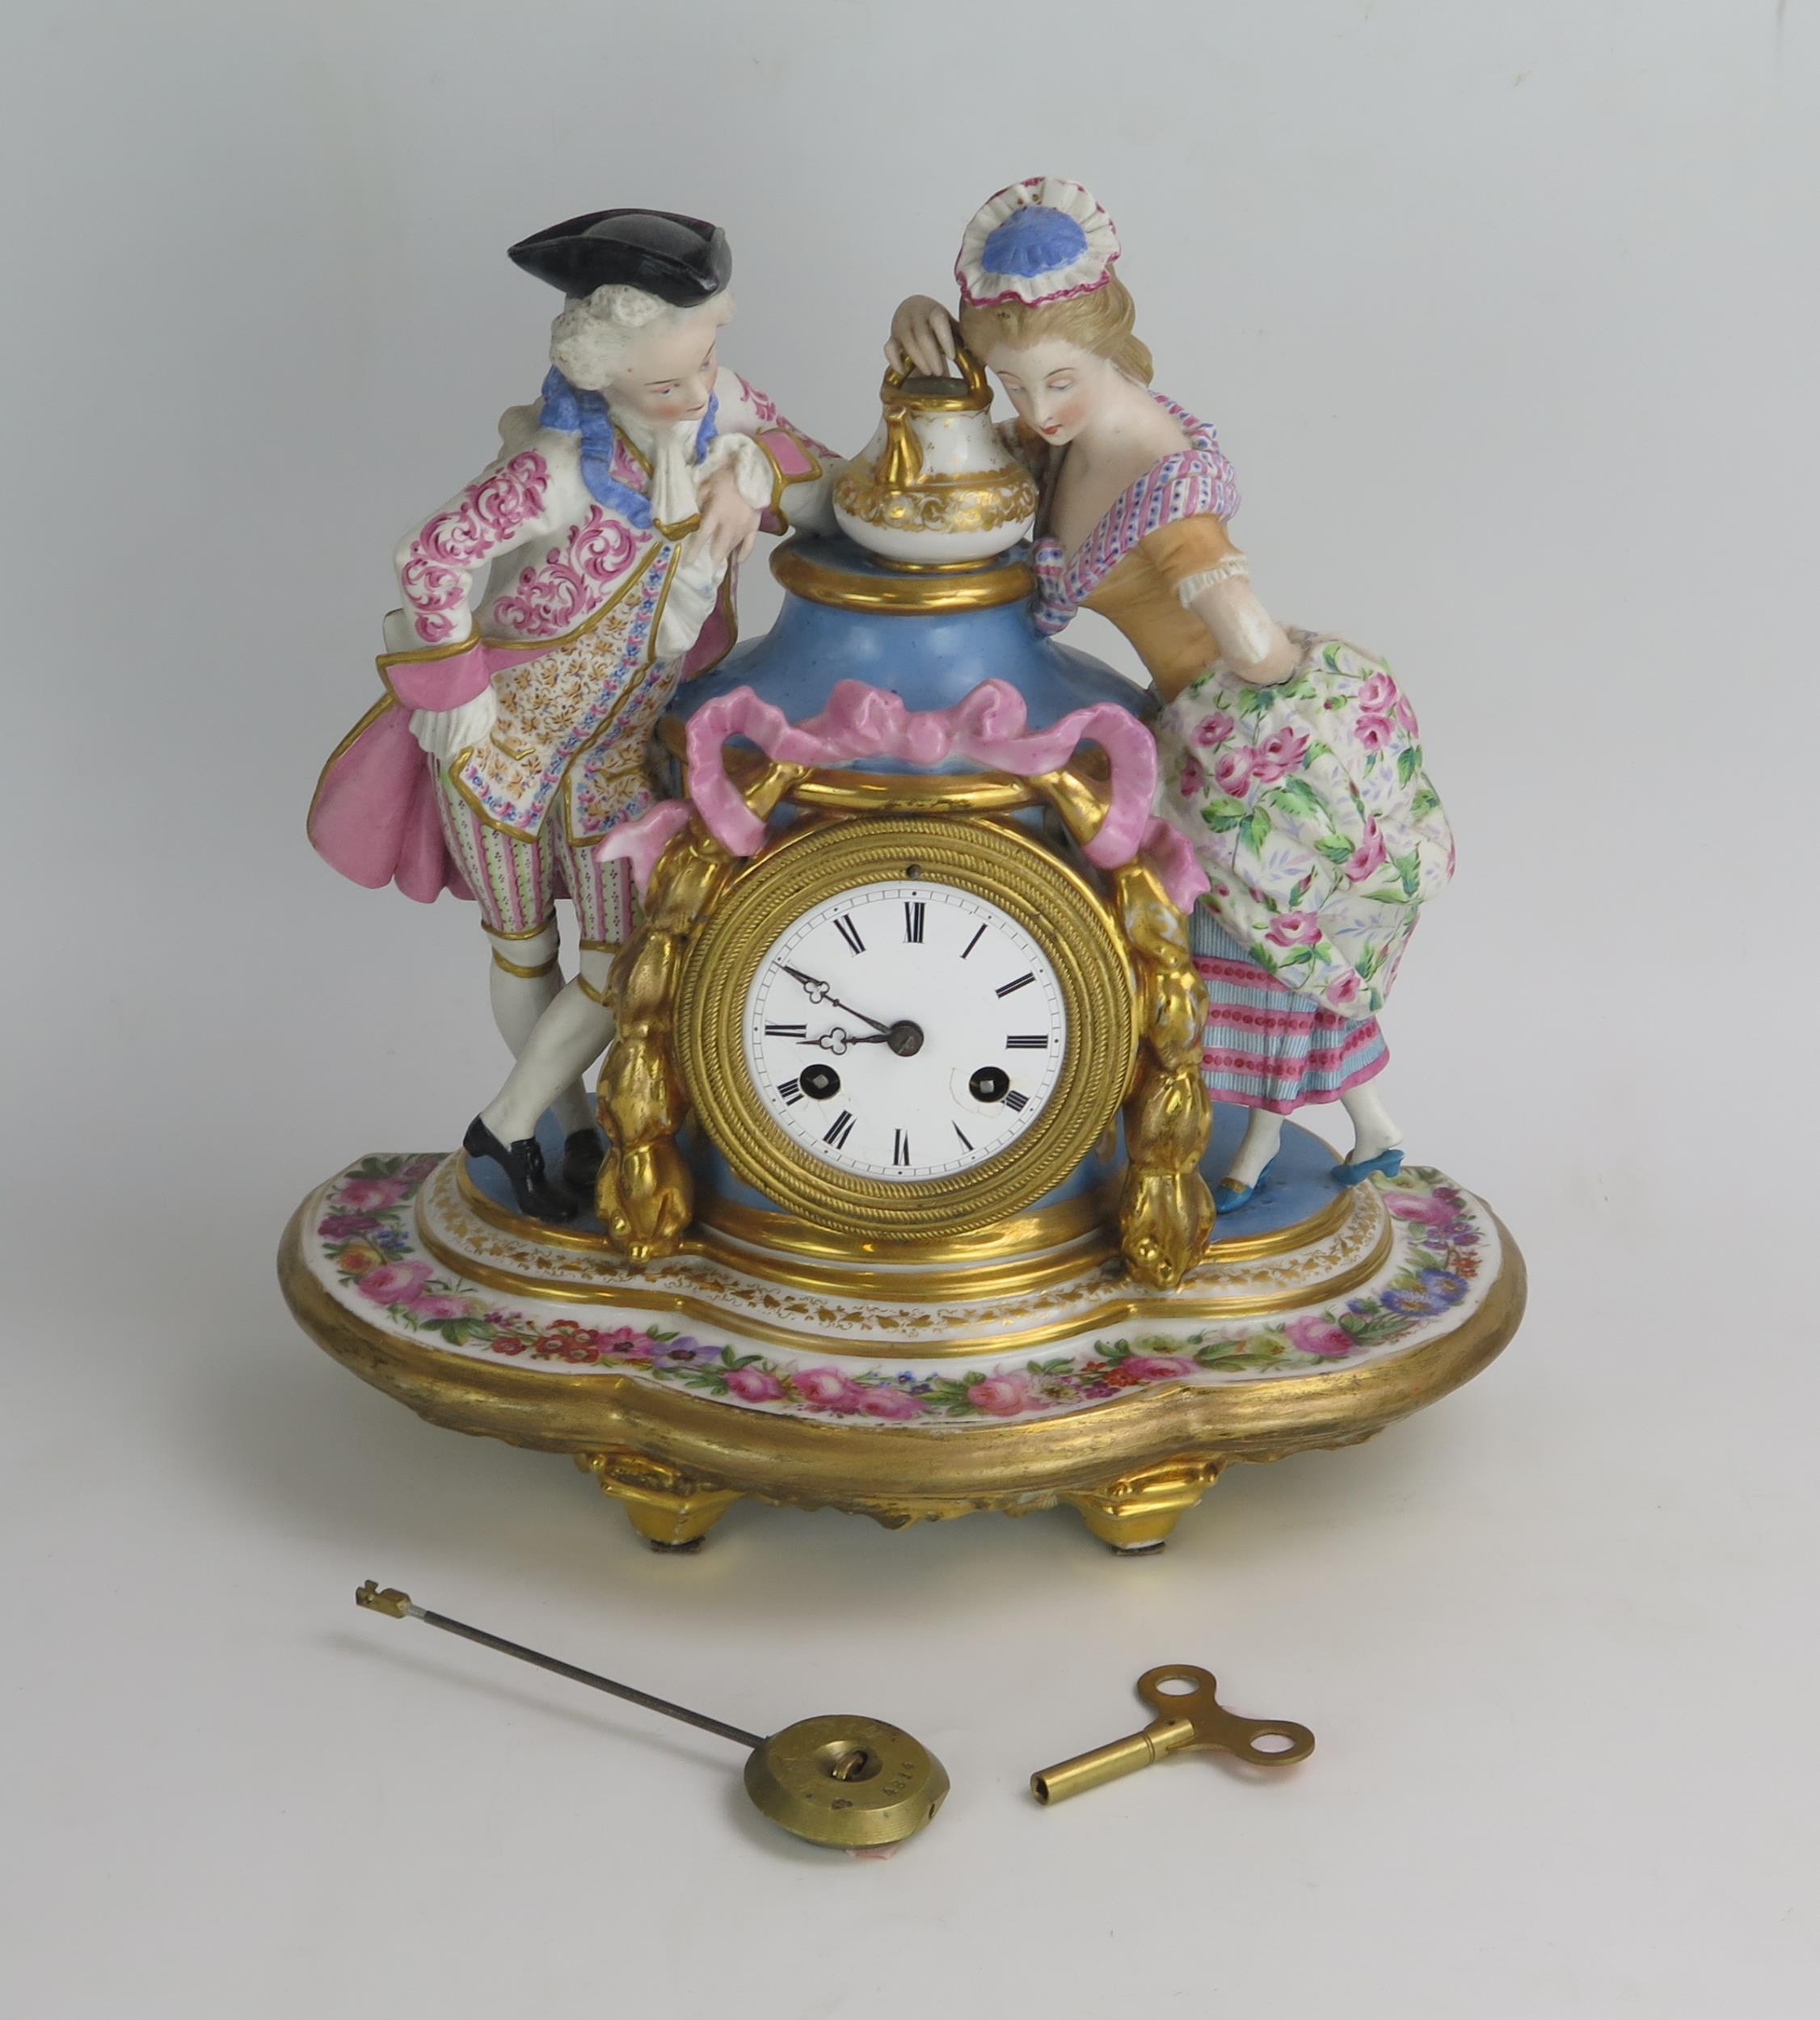 A 19th century French porcelain figural mantel clock, the urn-shaped case flanked by a gallant and